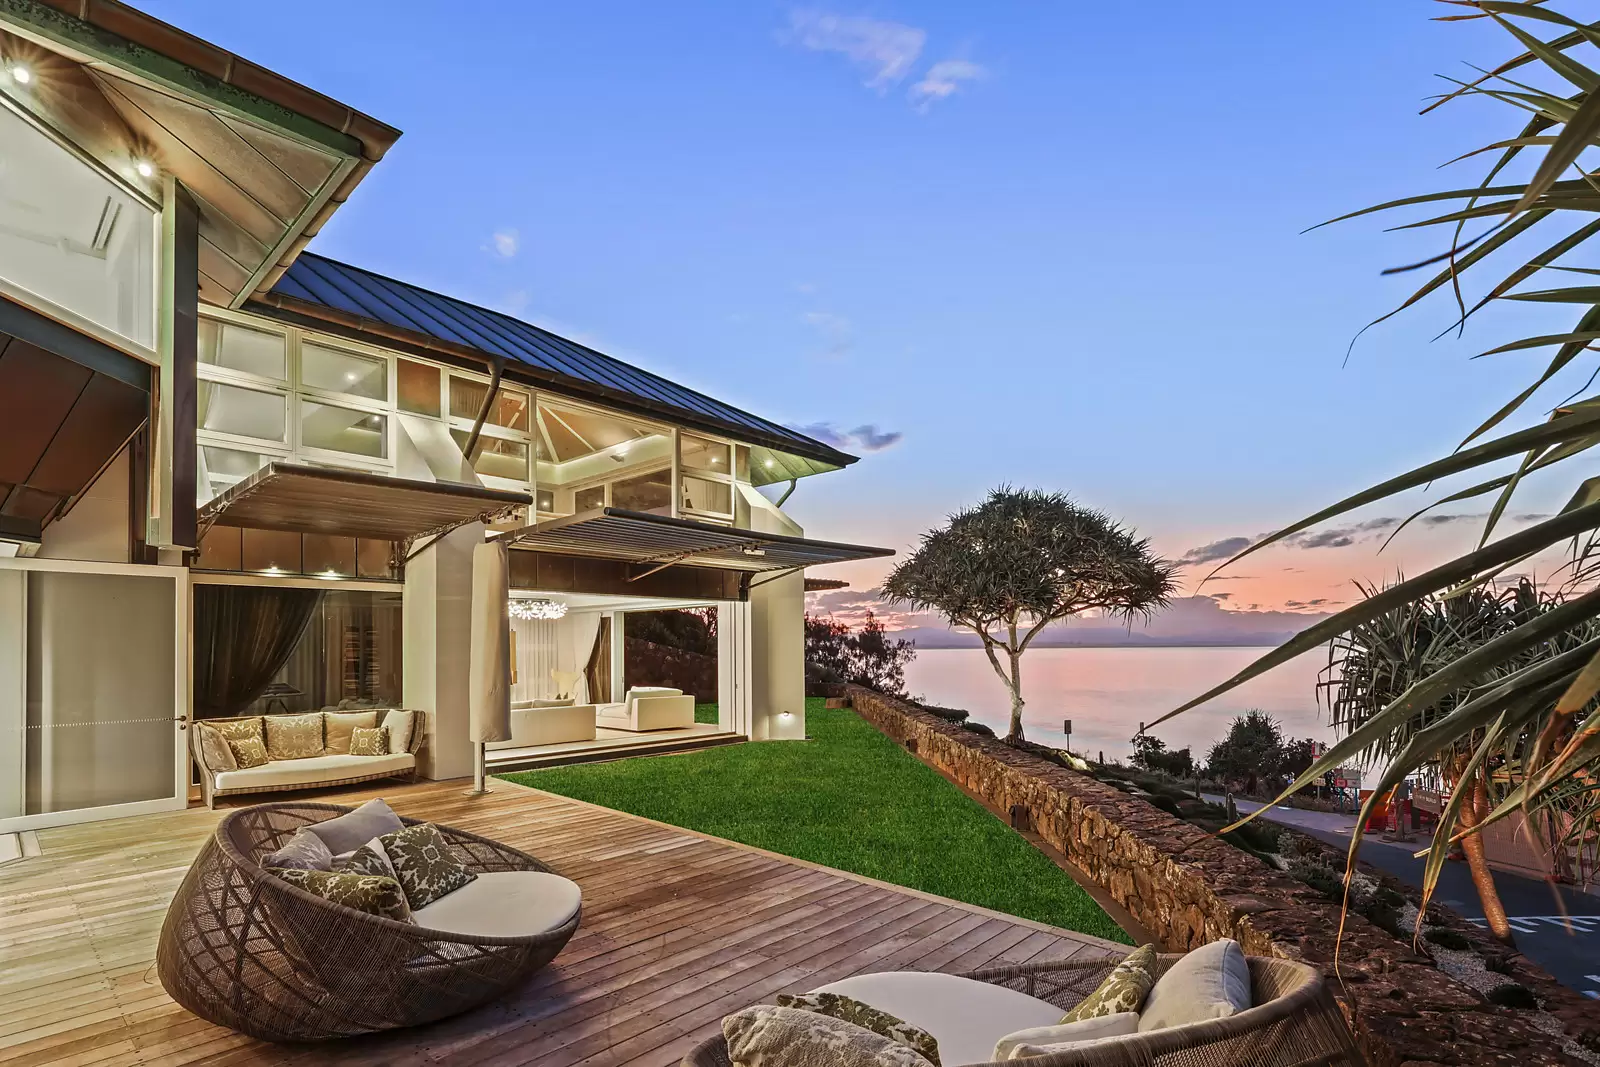 Photo #2: 41 Marine Parade, Byron Bay - For Sale by Sydney Sotheby's International Realty